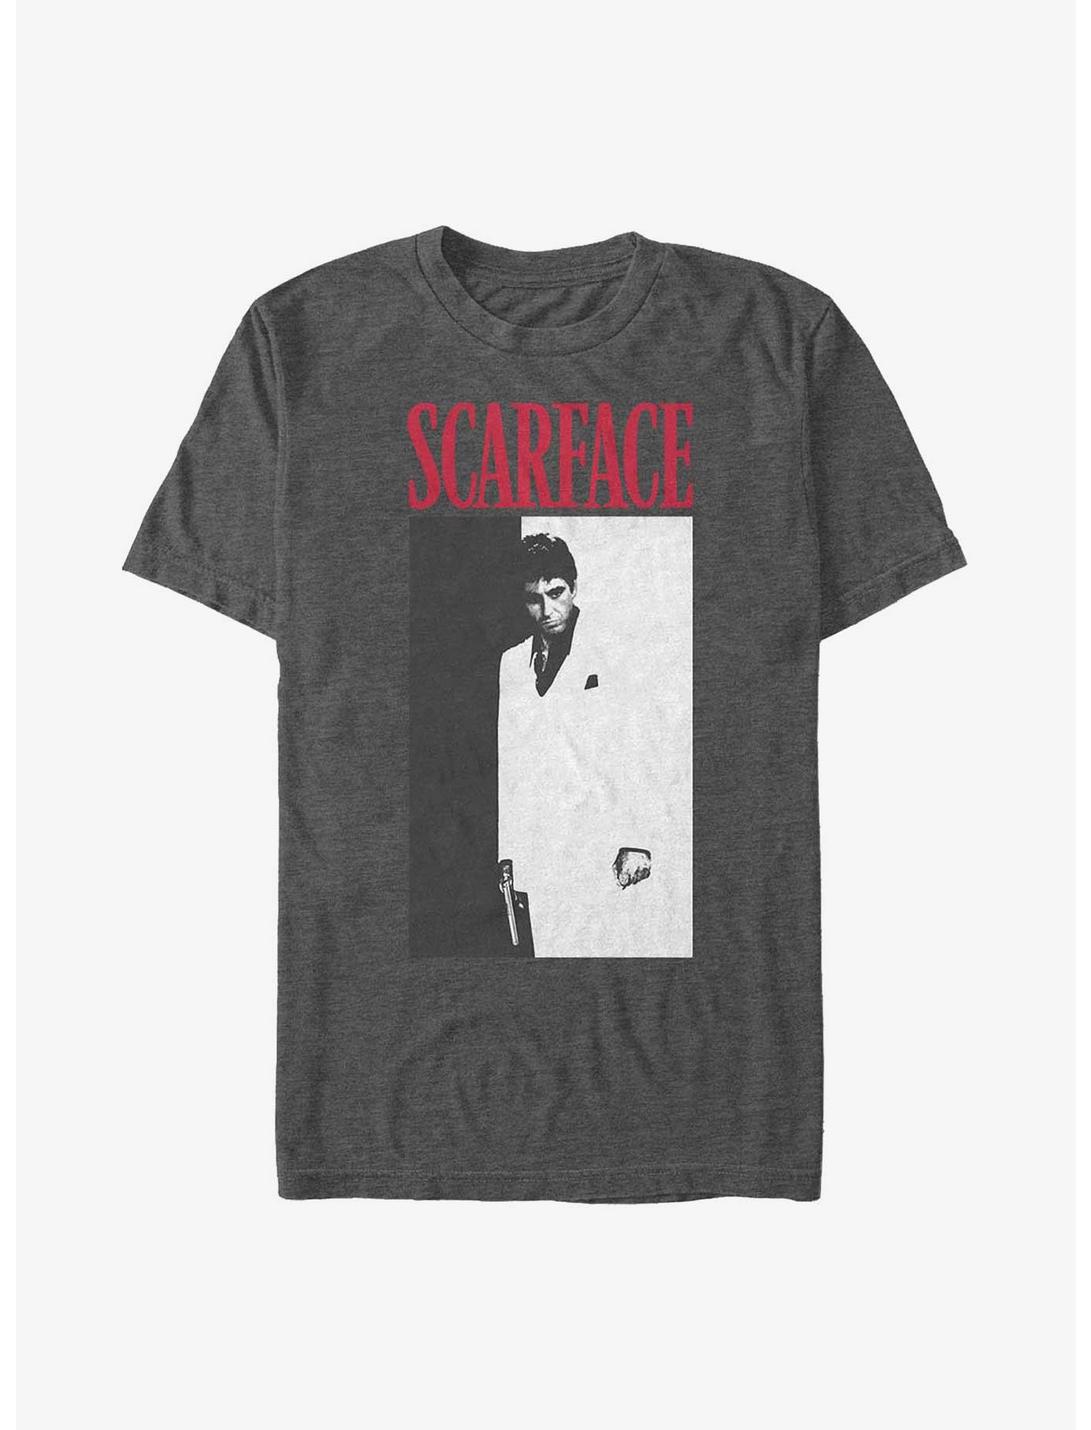 Scarface Movie Poster T-Shirt, CHAR HTR, hi-res